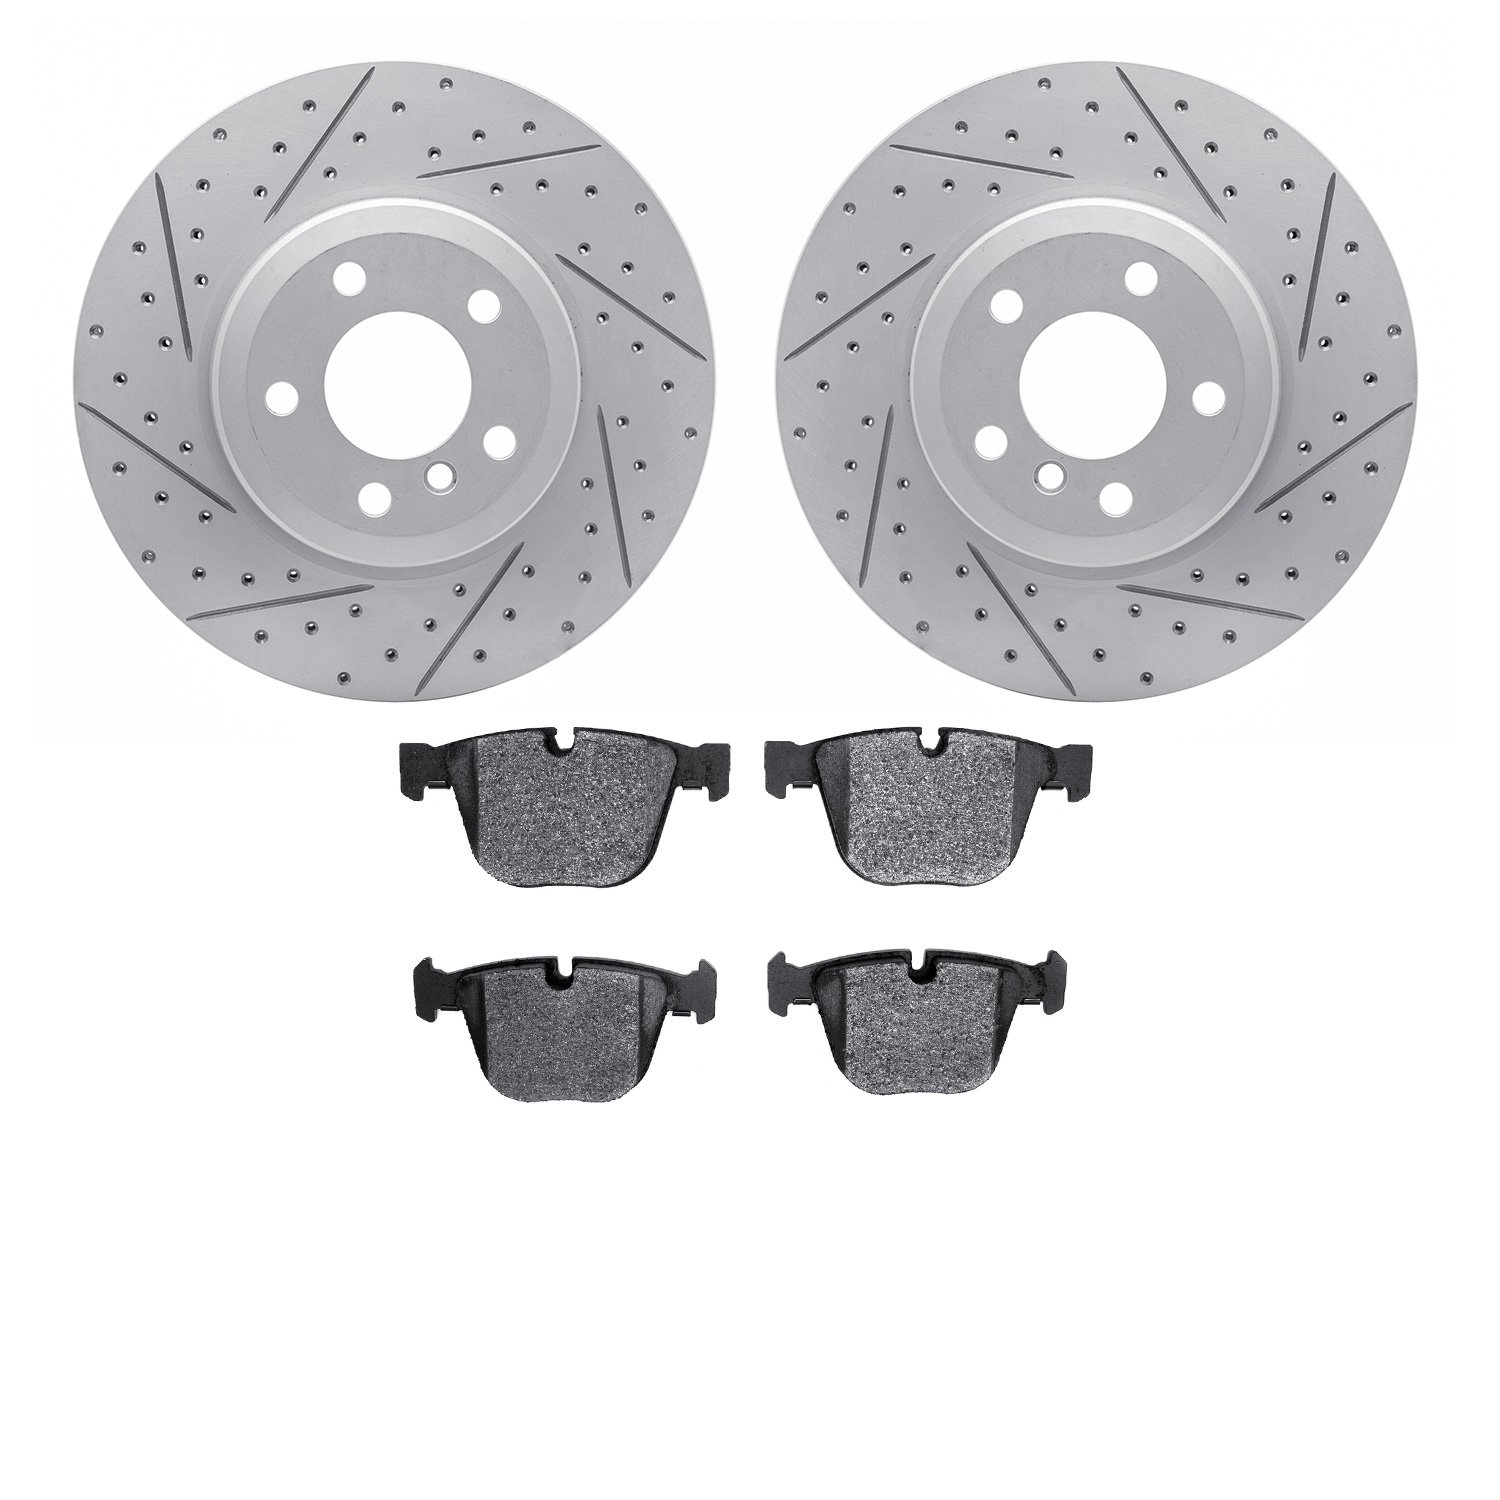 2502-31117 Geoperformance Drilled/Slotted Rotors w/5000 Advanced Brake Pads Kit, 2007-2019 BMW, Position: Rear